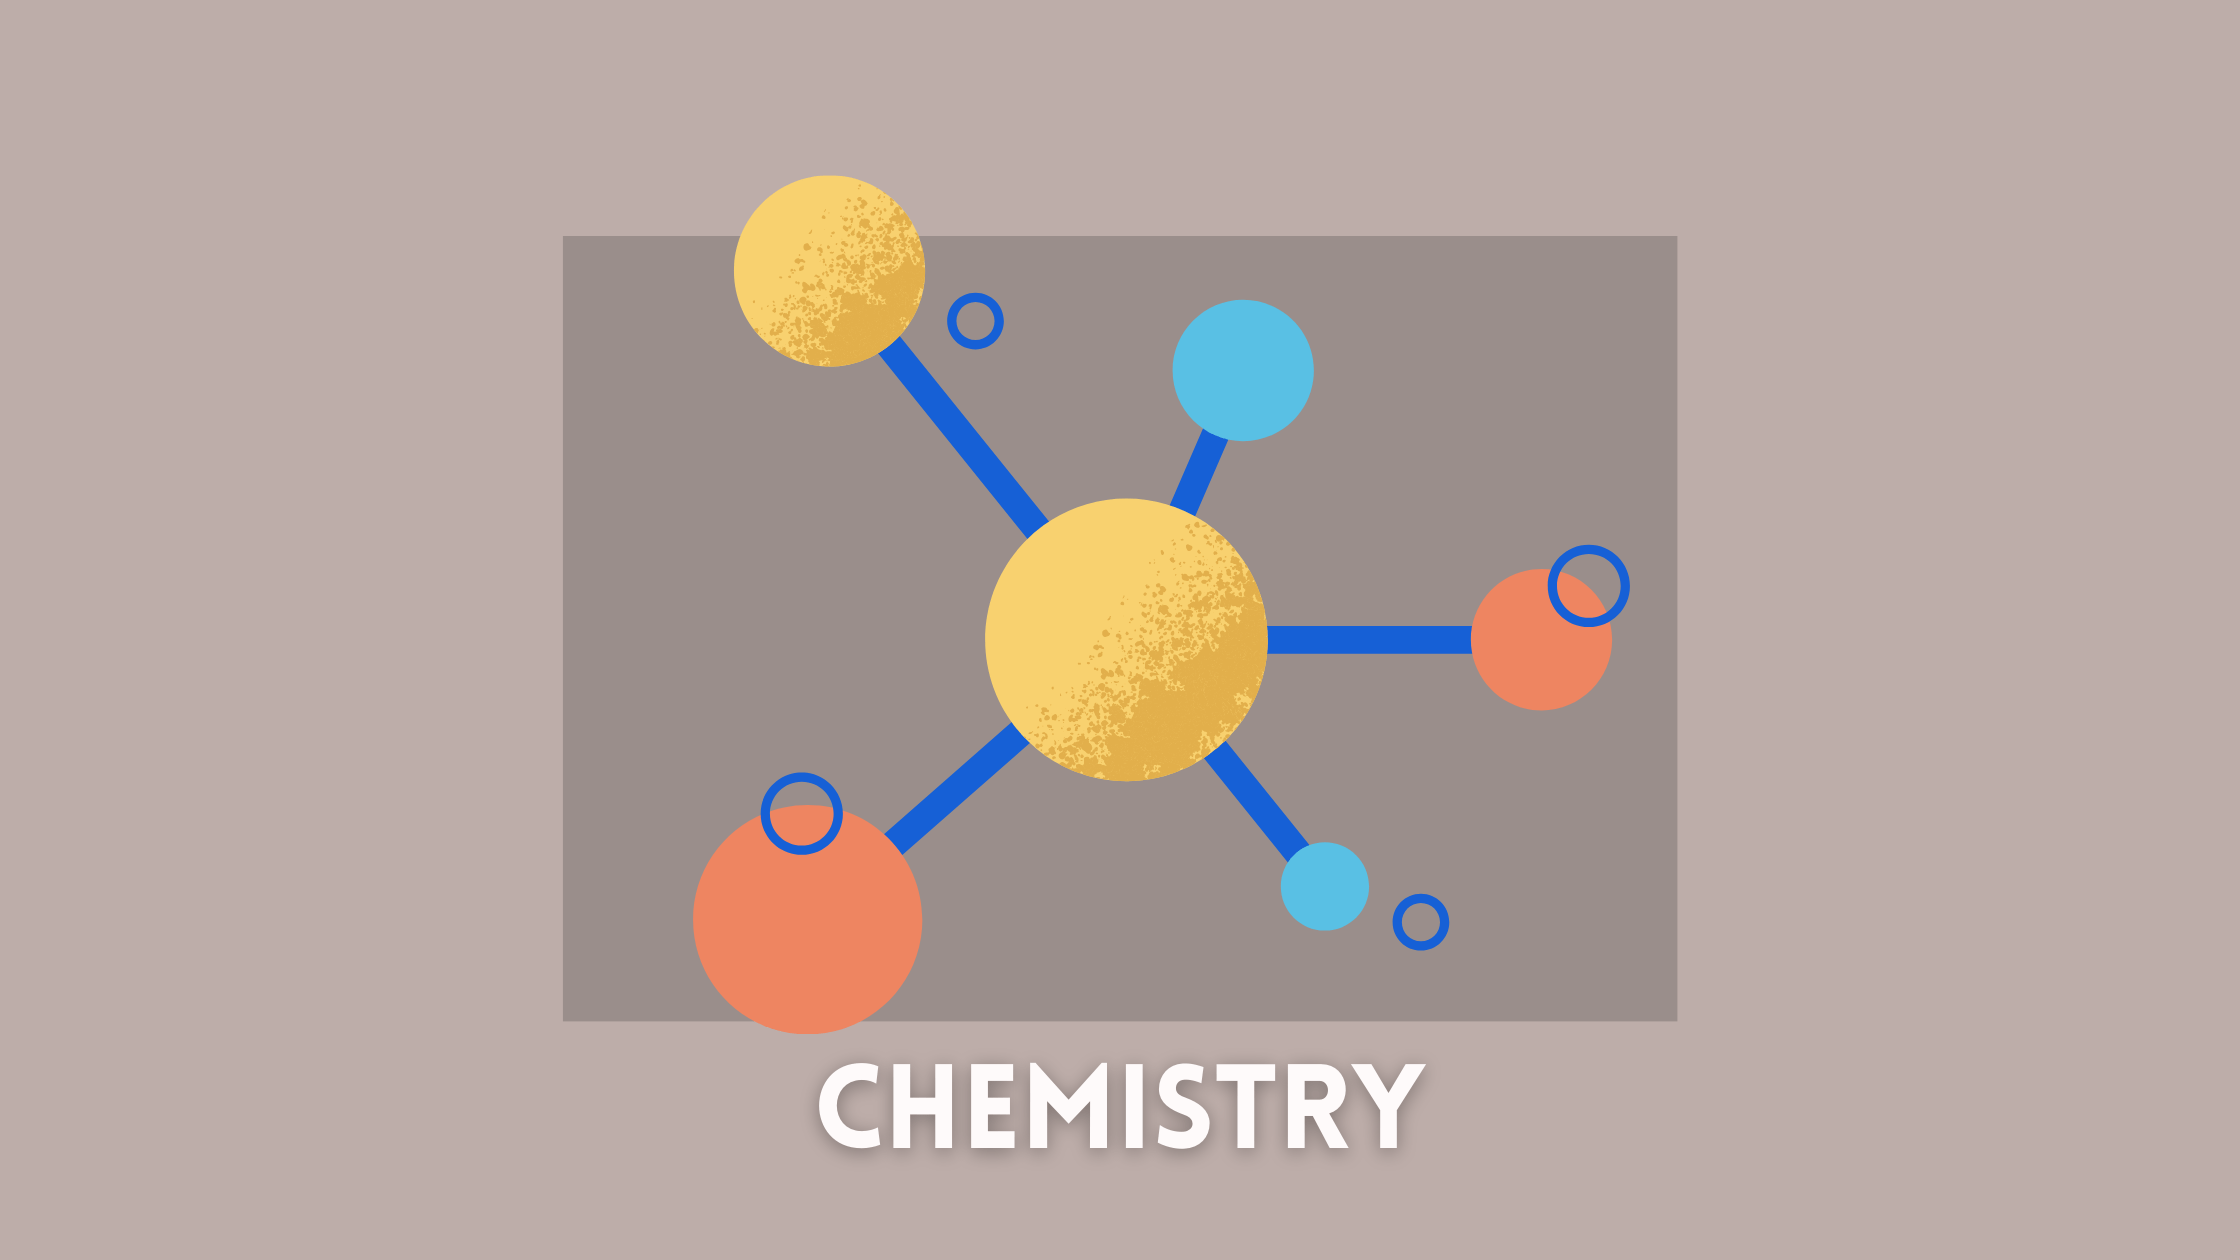 AI startup ideas in chemistry